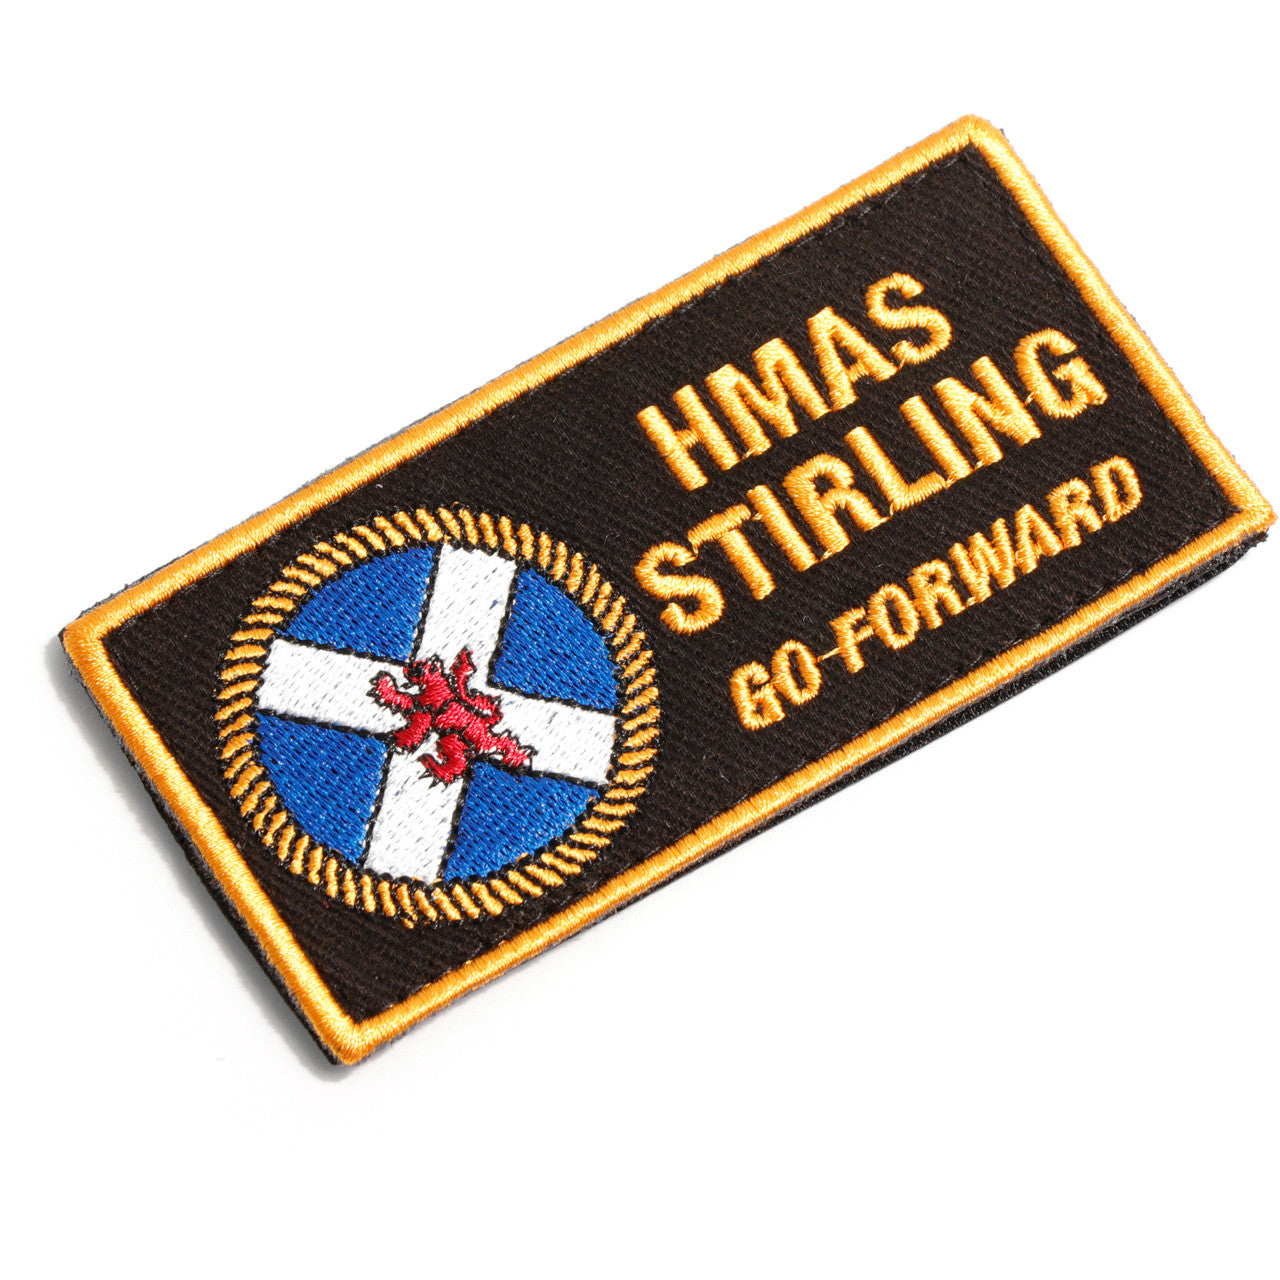 The HMAS Stirling DPNU Patch is a must-have for all navy enthusiasts. This embroidered patch features the iconic HMAS Stirling logo and measures 100x50mm. With its convenient hook-and-loop backing, it can easily be attached to any garment or accessory. Show your support for the navy with this high-quality patch. www.defenceqstore.com.au